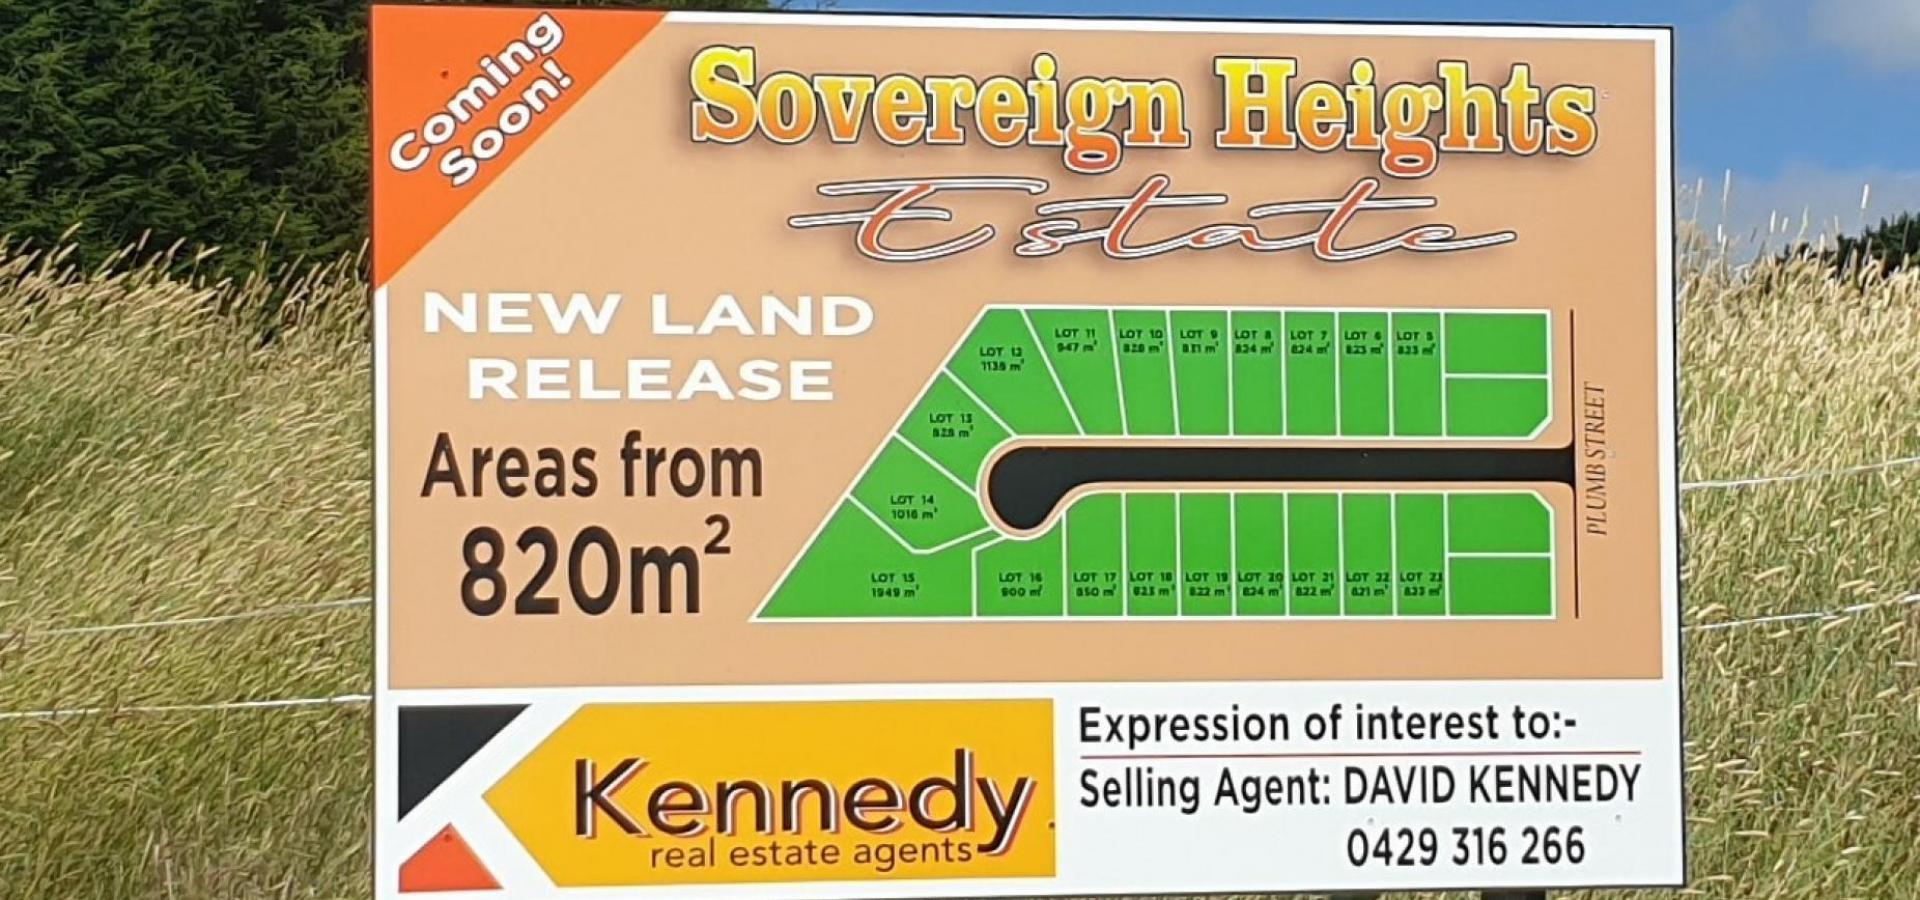 NEW LAND RELEASE, SOVEREIGN HILL ESTATE, AREAS FROM 820M2